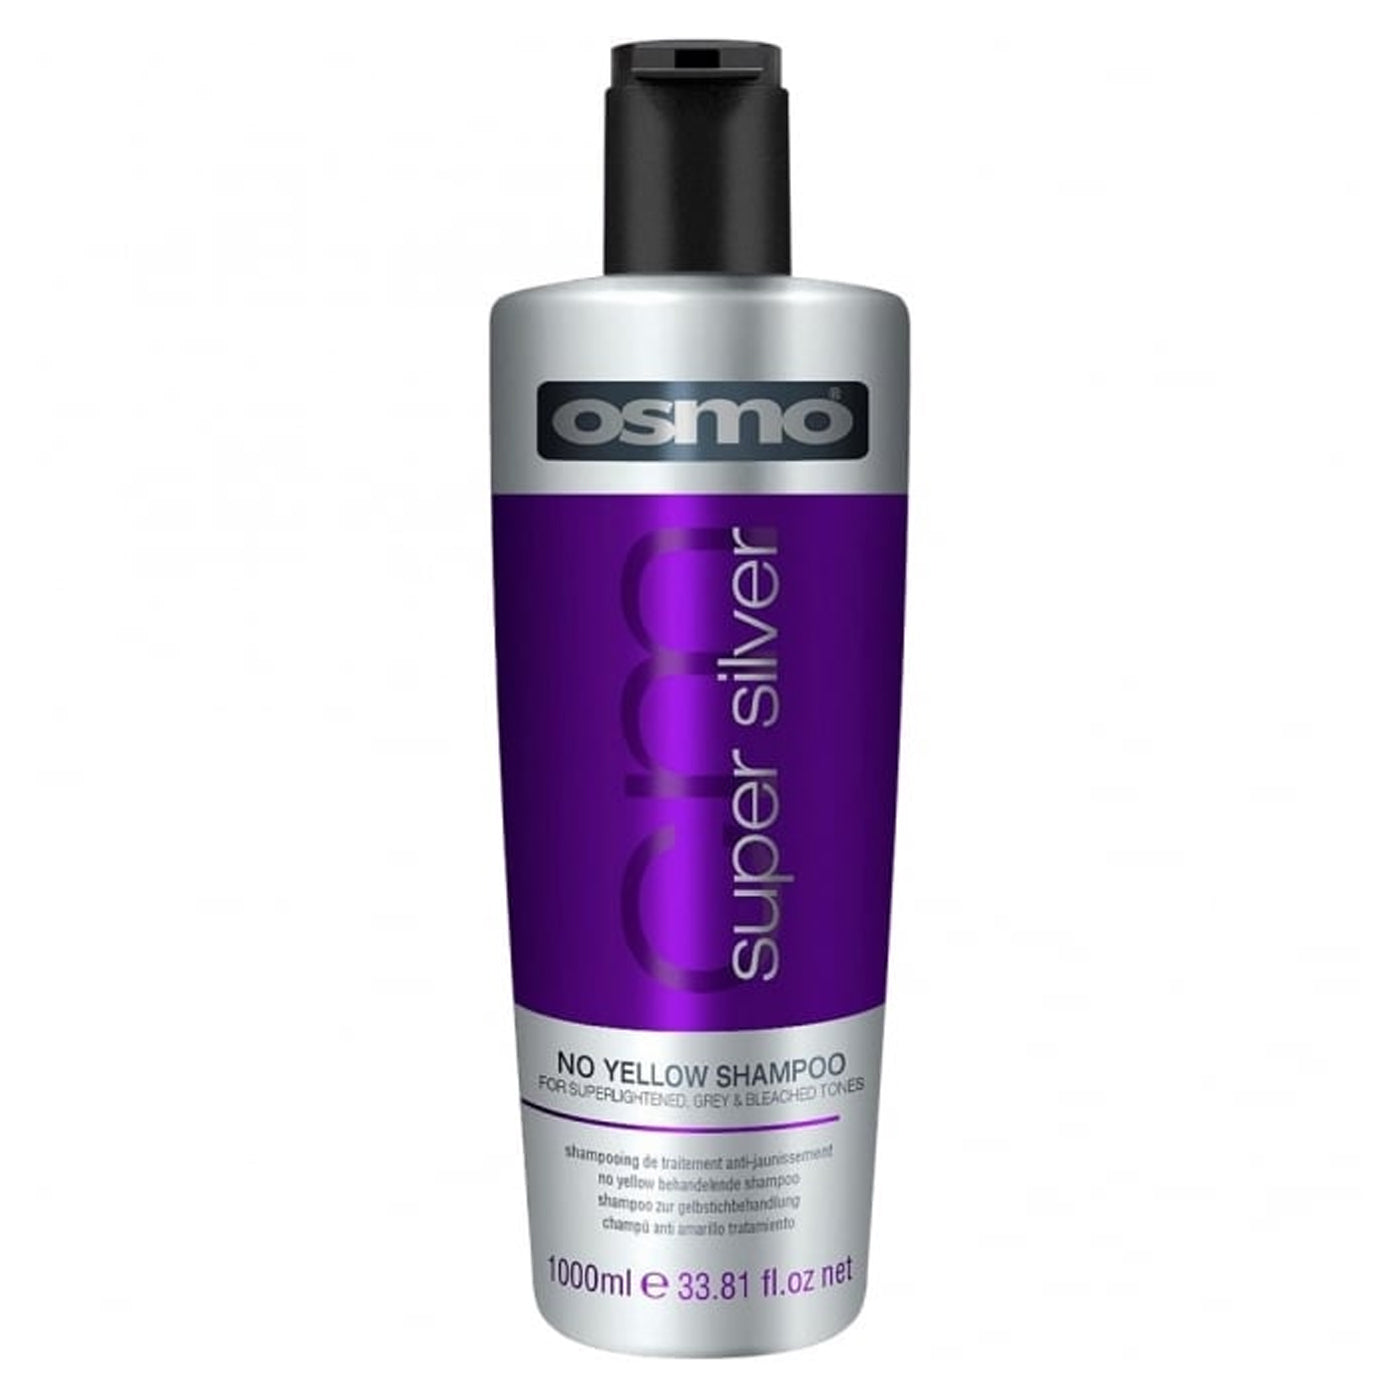 Osmo Super Silver No Yellow Shampoo (1000ml) - Ultimate Hair and Beauty